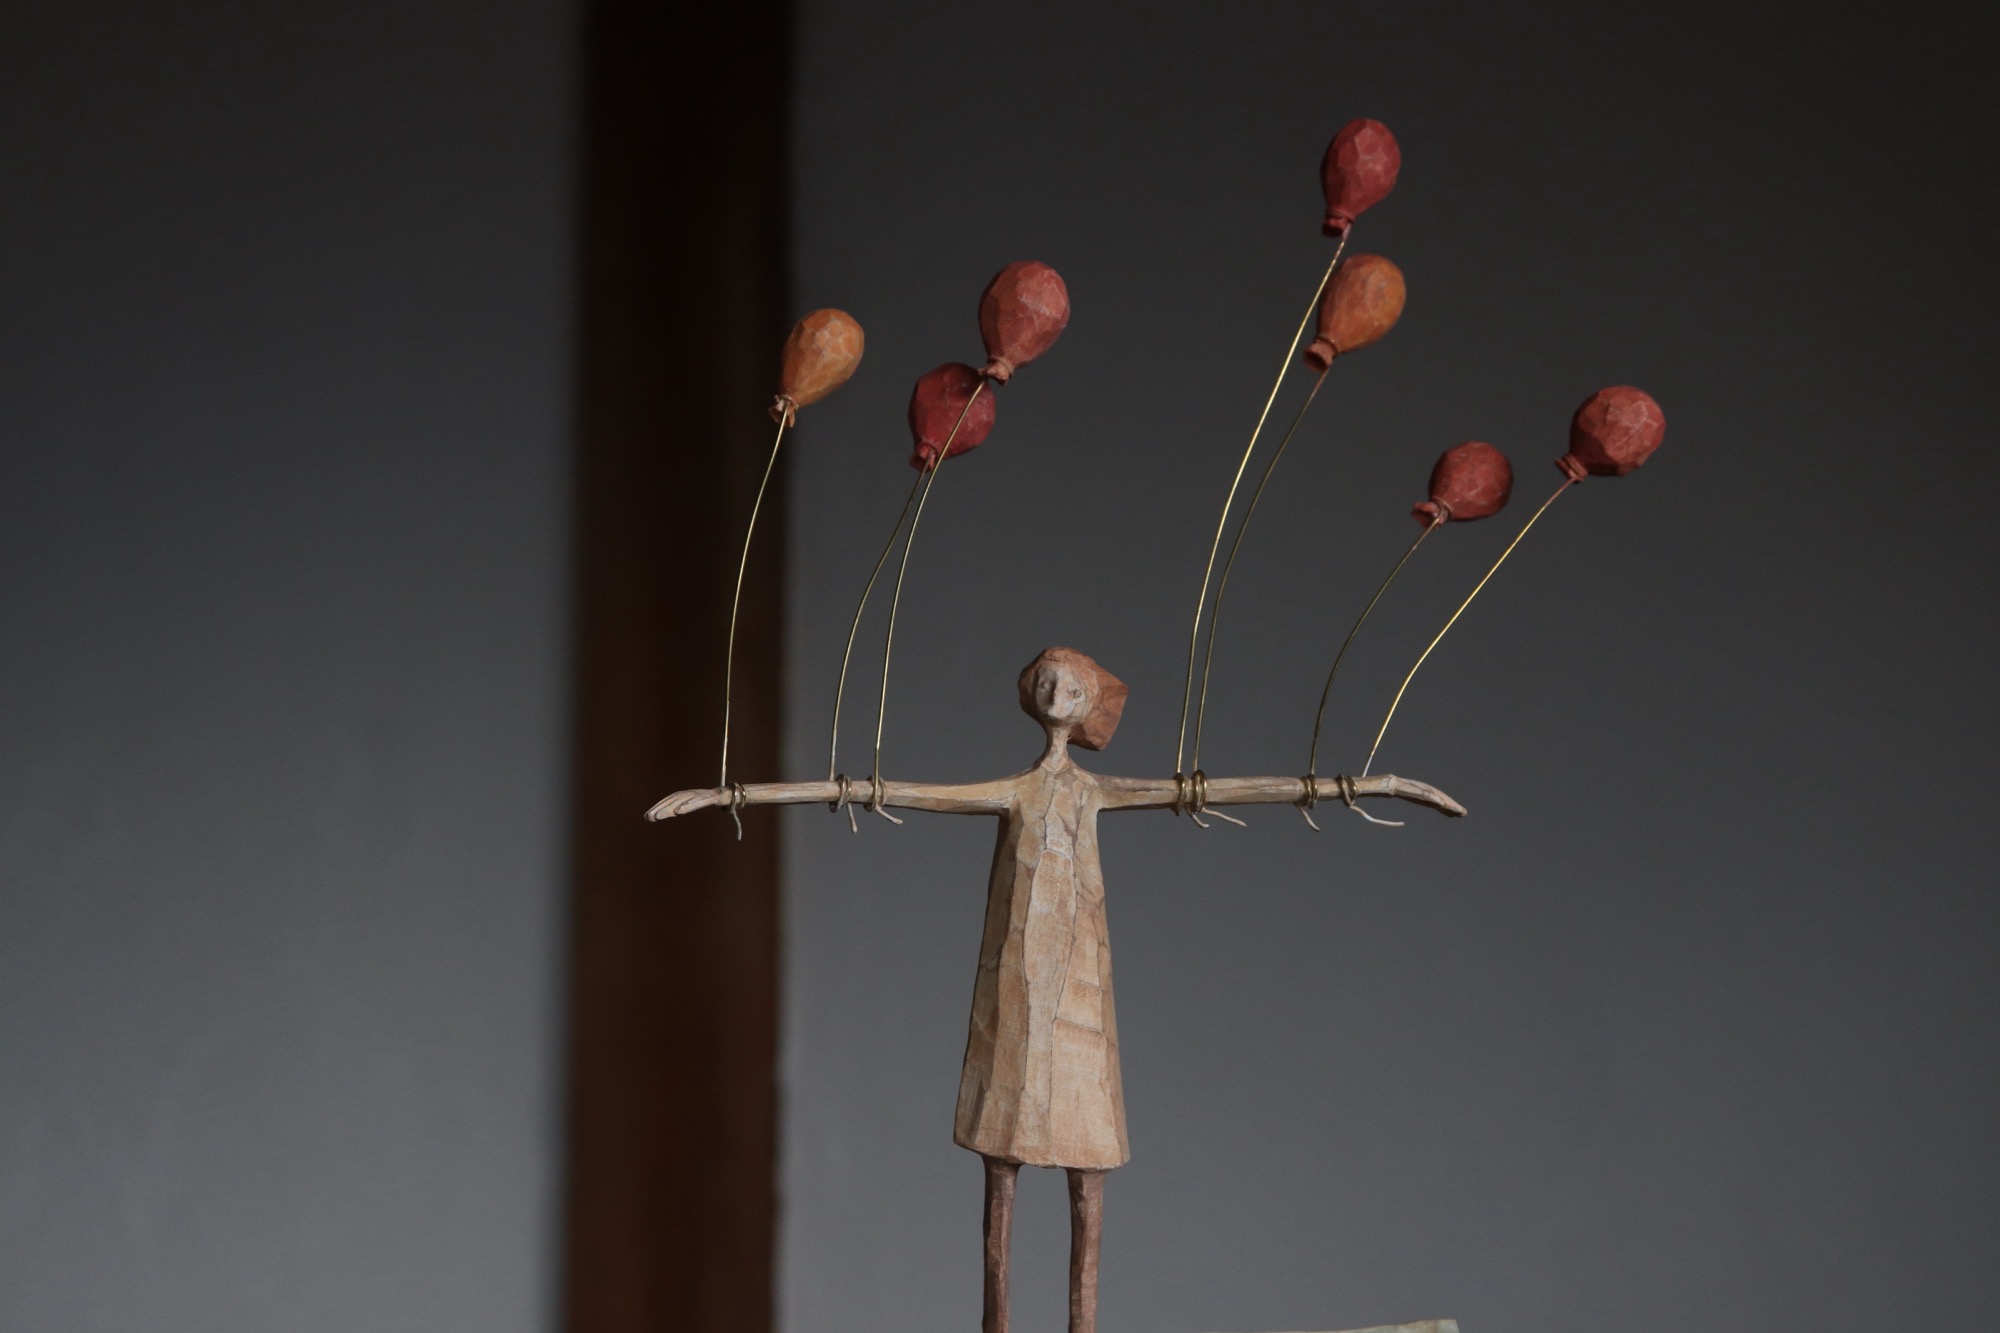 a wooden sculpture of a slender figure with arms outstretched with balloons tied to them